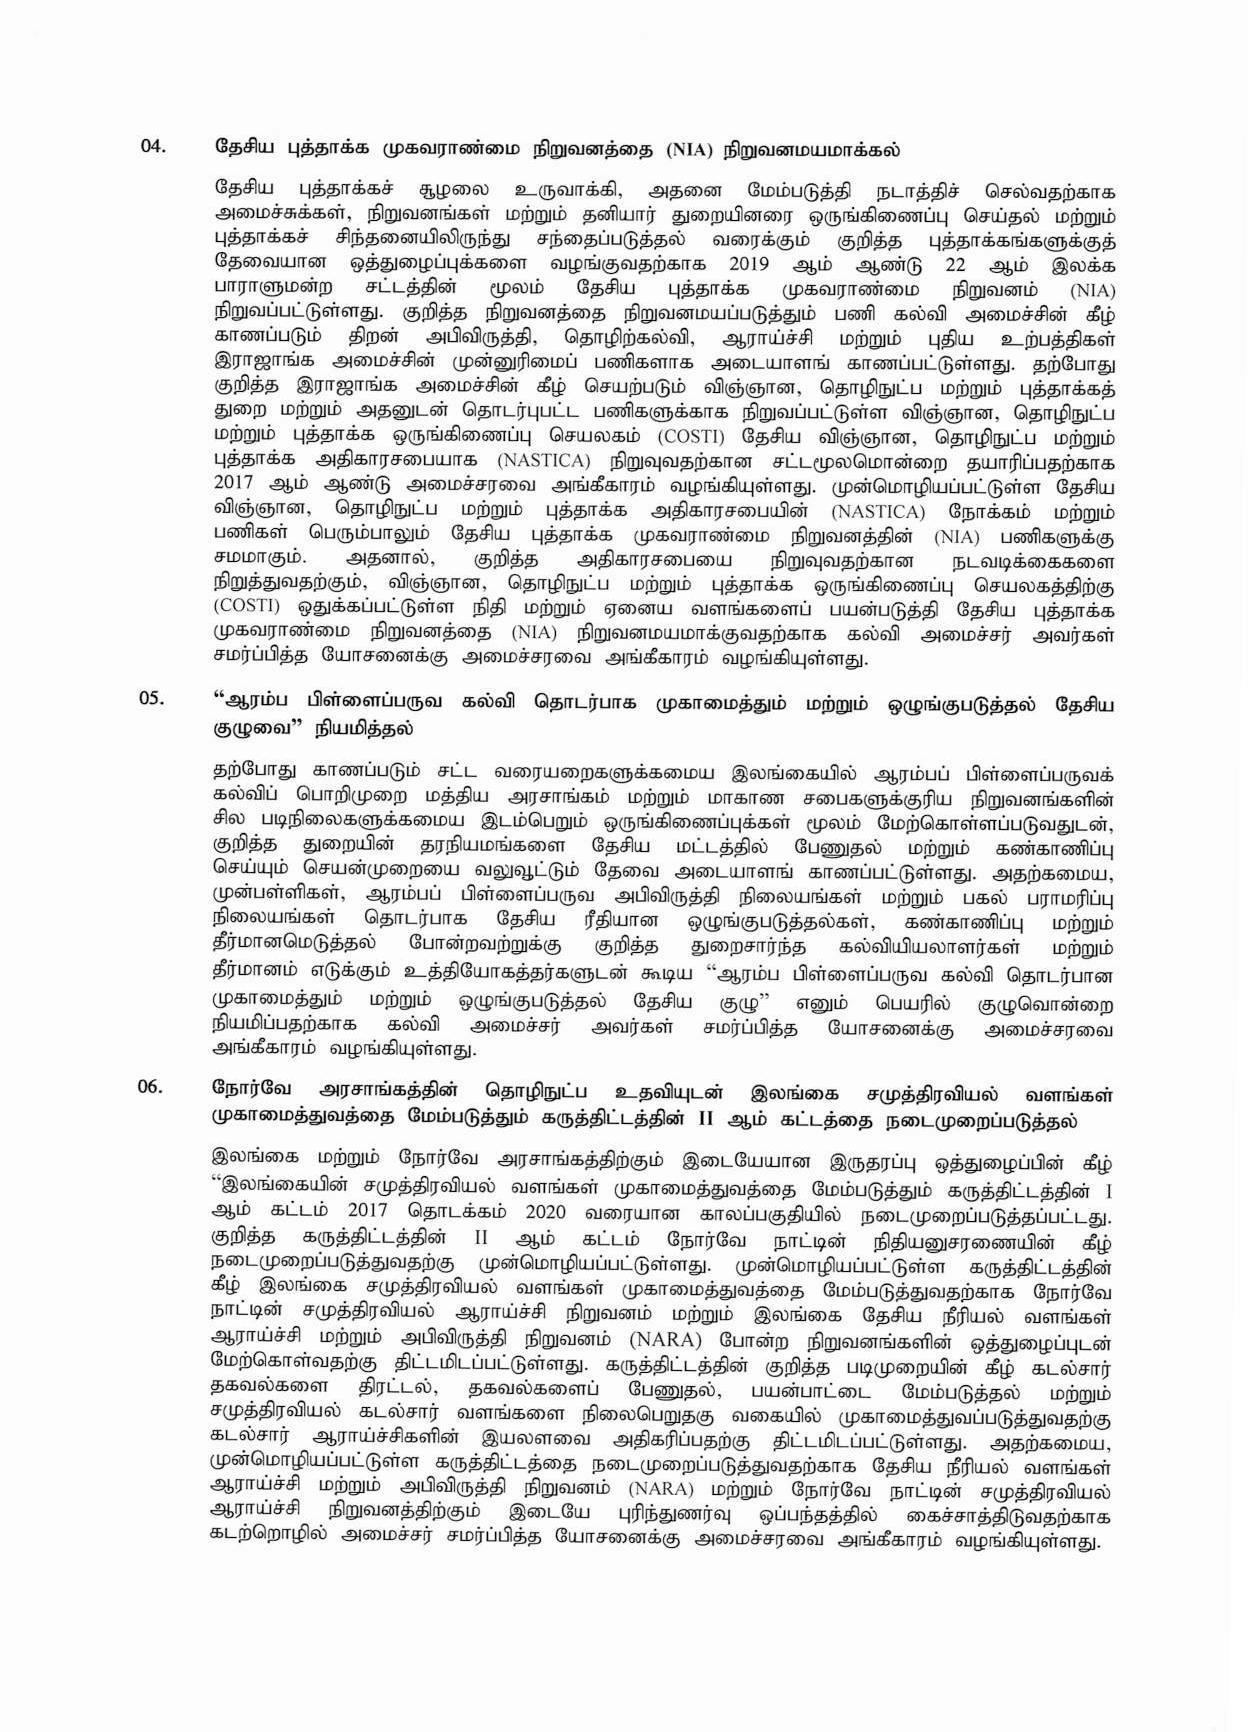 Cabinet Decision on 08.03.2021 Tamil page 002